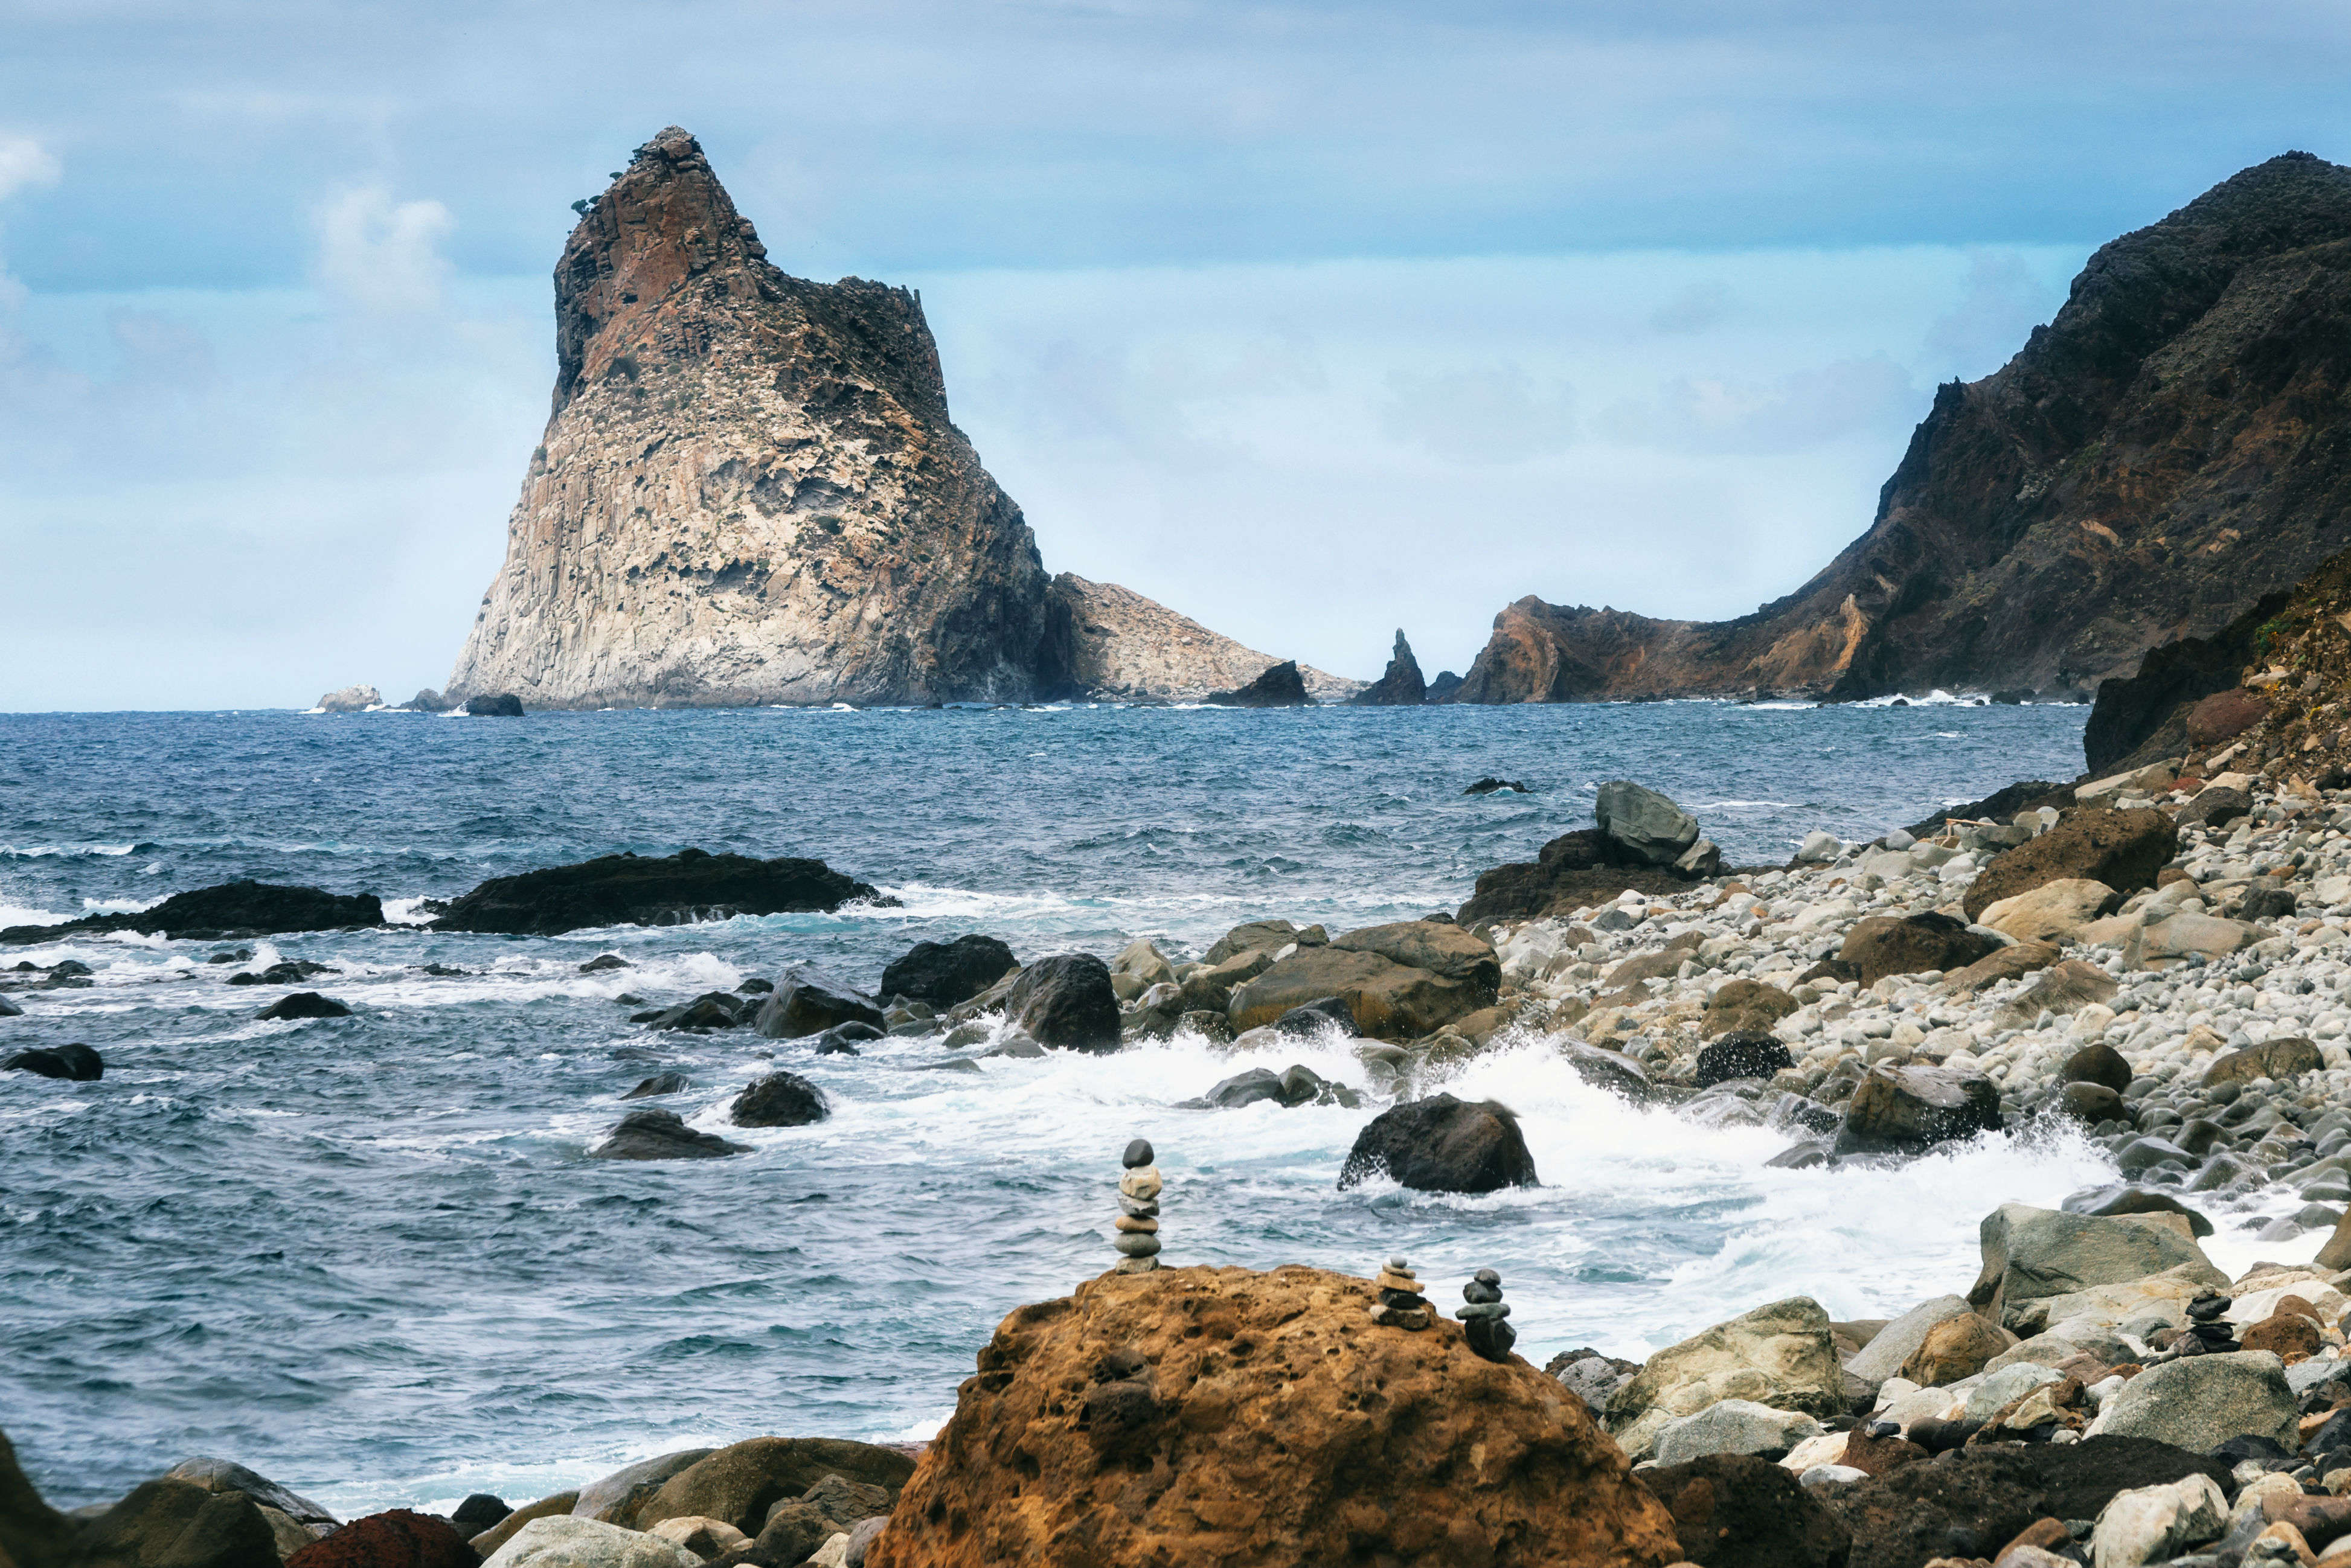 Tenerife’s stone towers are harming the environment, it's time you stop